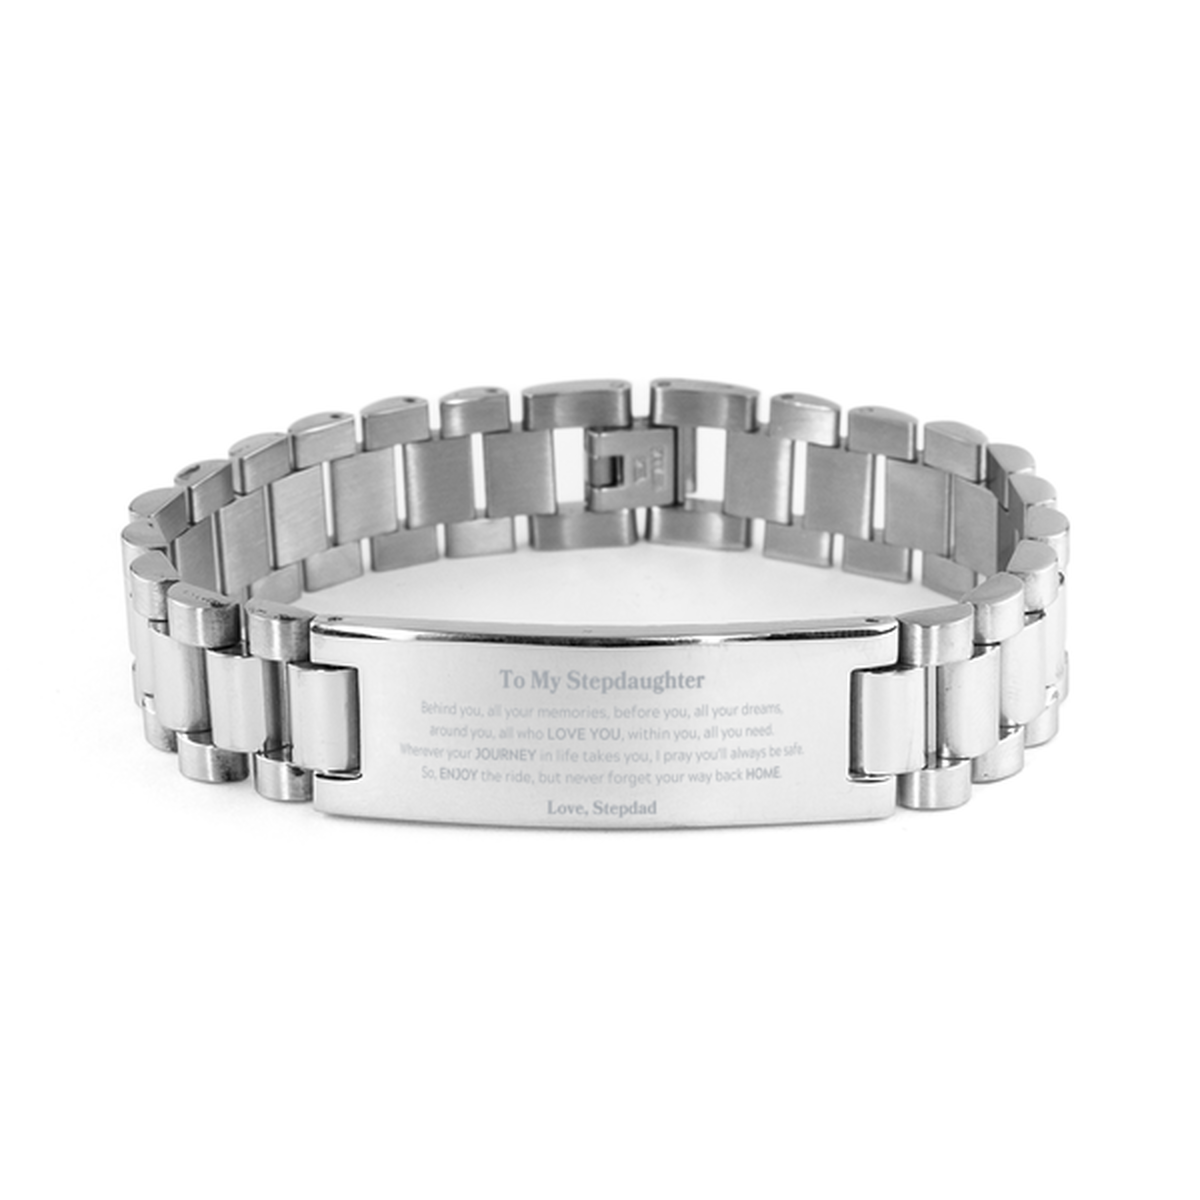 To My Stepdaughter Graduation Gifts from Stepdad, Stepdaughter Ladder Stainless Steel Bracelet Christmas Birthday Gifts for Stepdaughter Behind you, all your memories, before you, all your dreams. Love, Stepdad